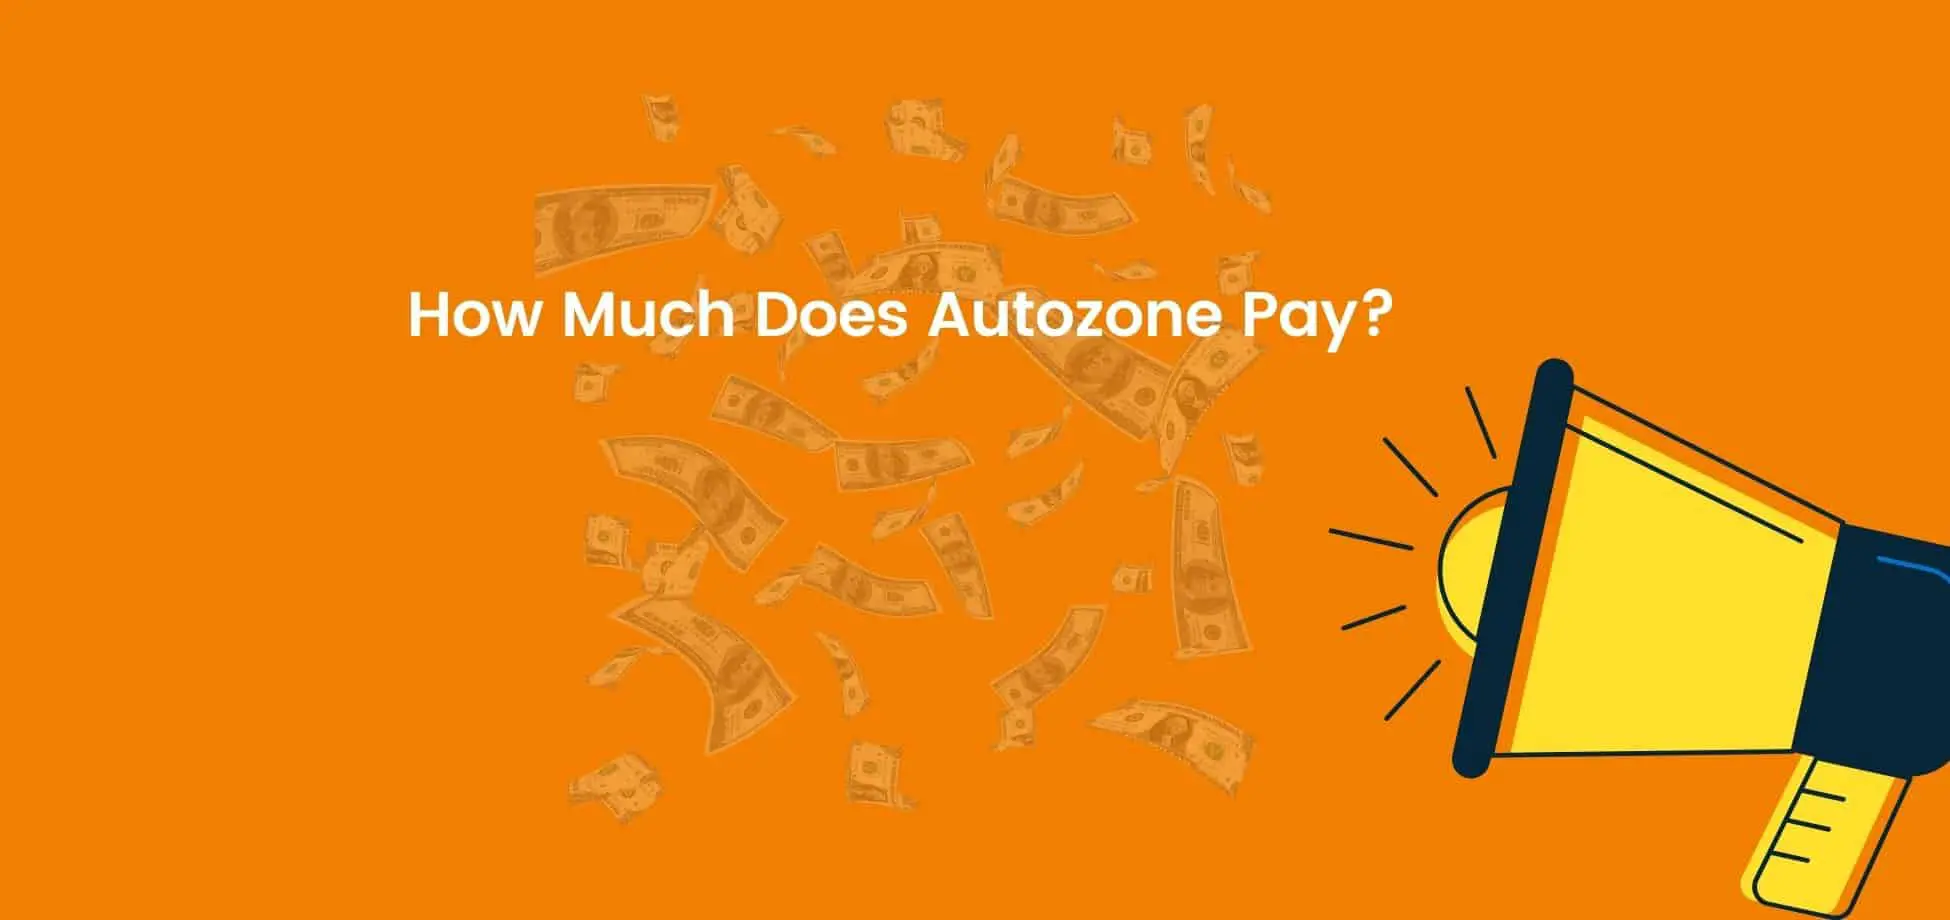 Overall, Autozone salaries are competitive in the automotive parts industry but the starting pay is another story.